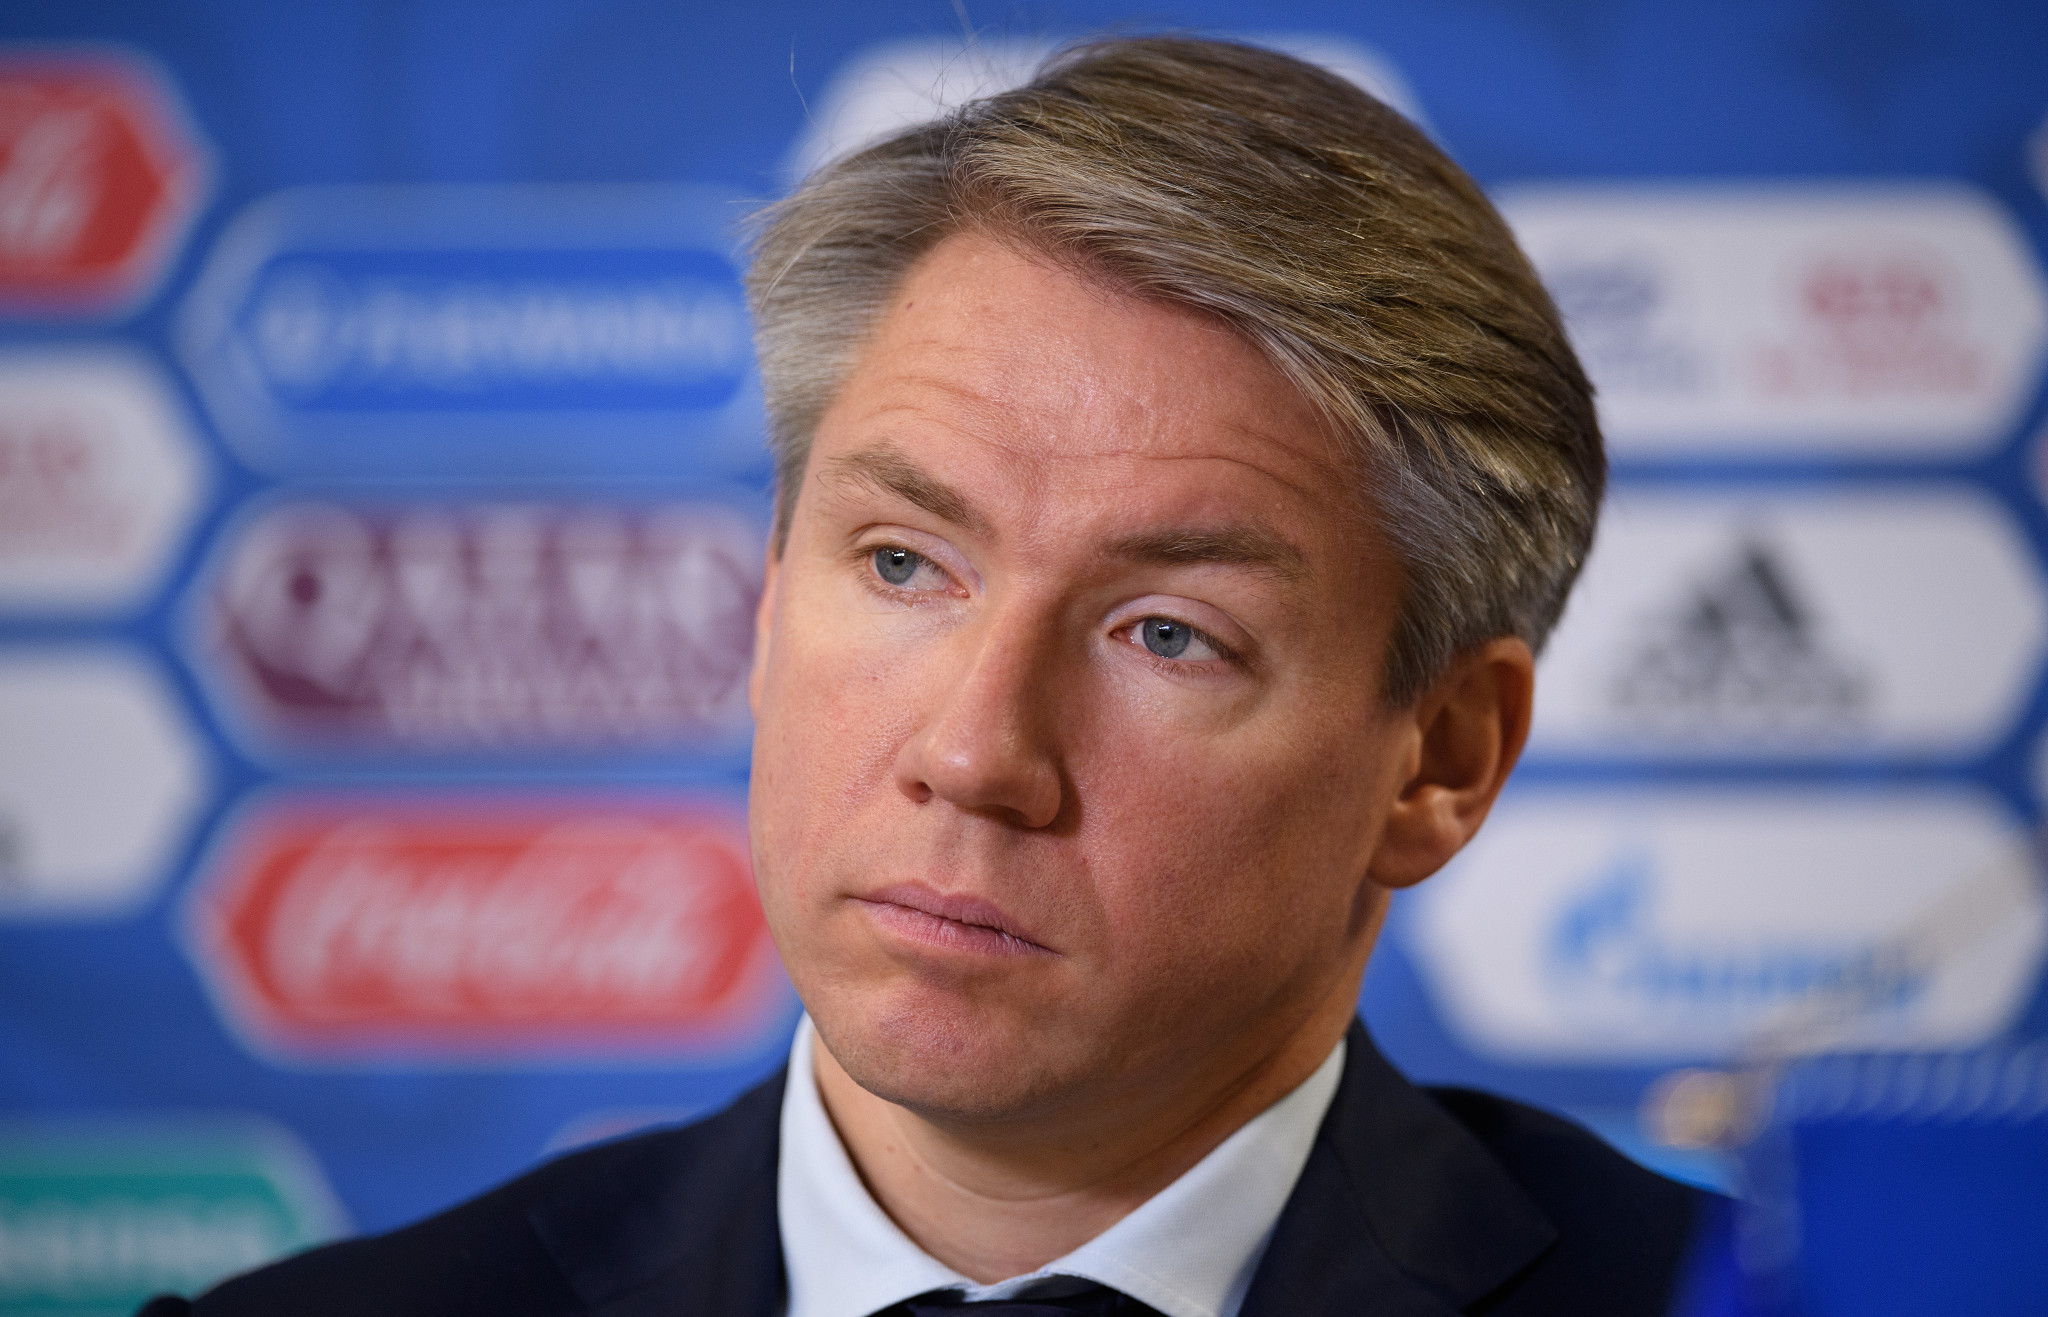 Former World Cup bid leader Alexei Sorokin could be a good candidate for furthering the country's sports interests if plans for a World Friendship Games are advanced ©Getty Images